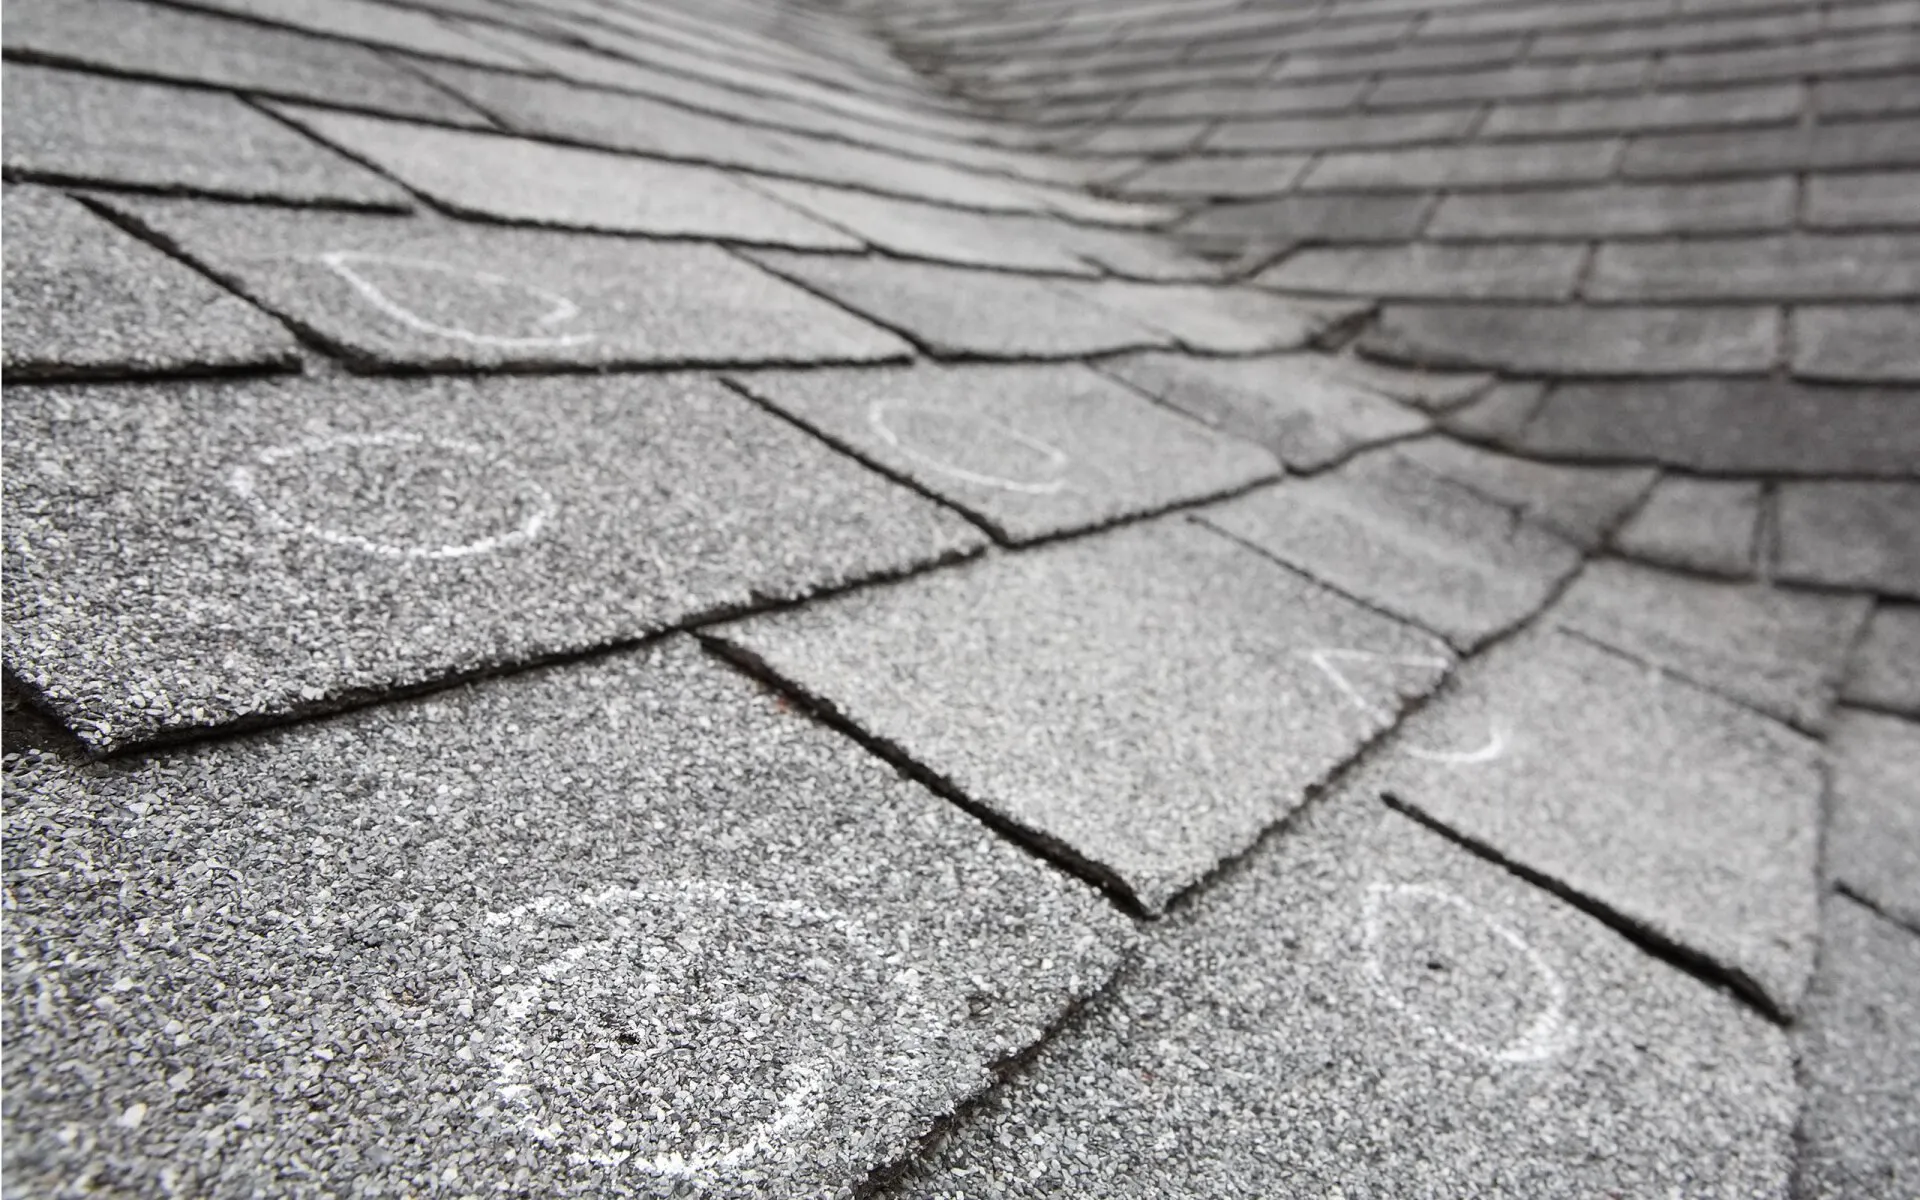 roofing inspection > Annual Roof Inspections - San Diego's Affordable Roofer